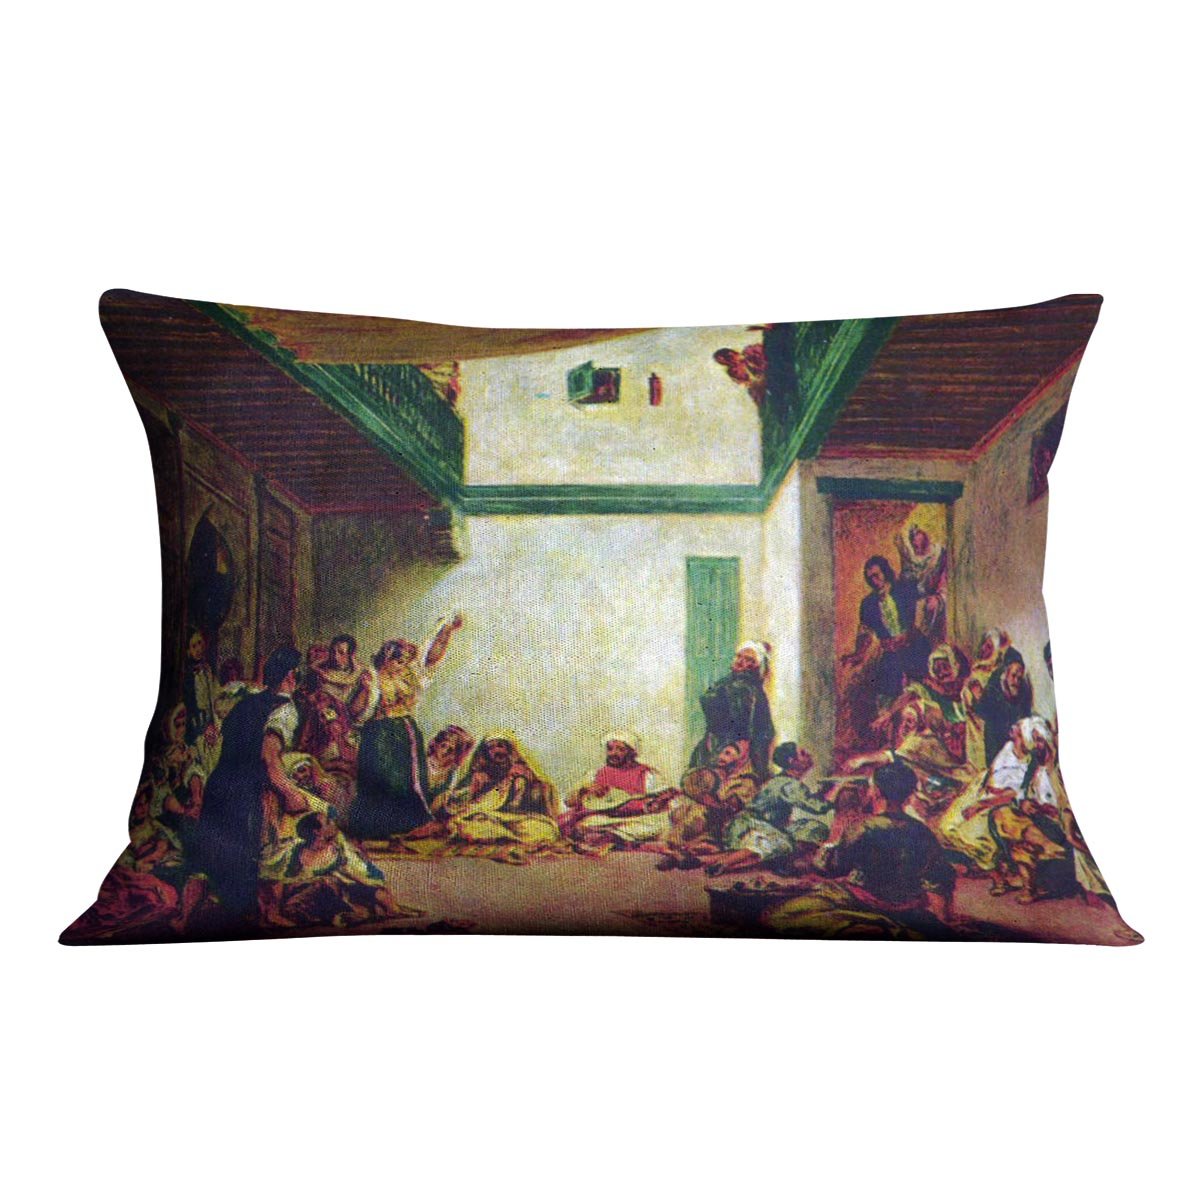 Jewish wedding after Delacroix by Renoir Throw Pillow